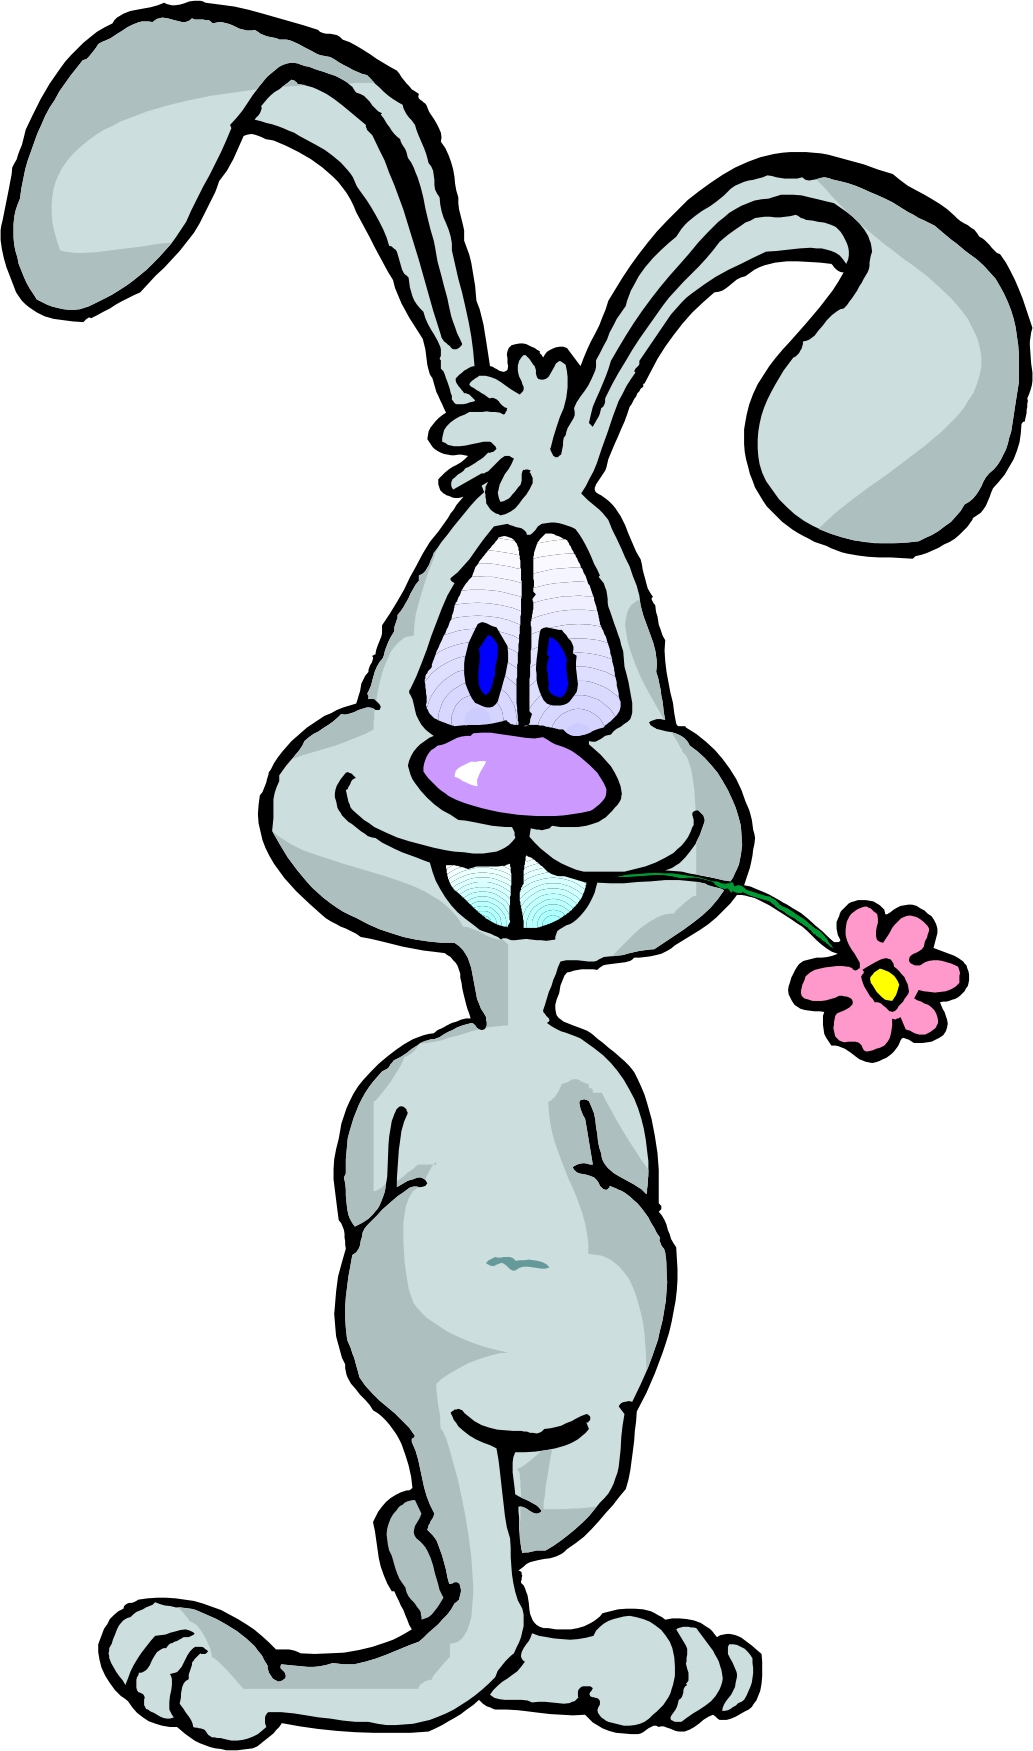 Cartoon Rabbit Images - Clipart library